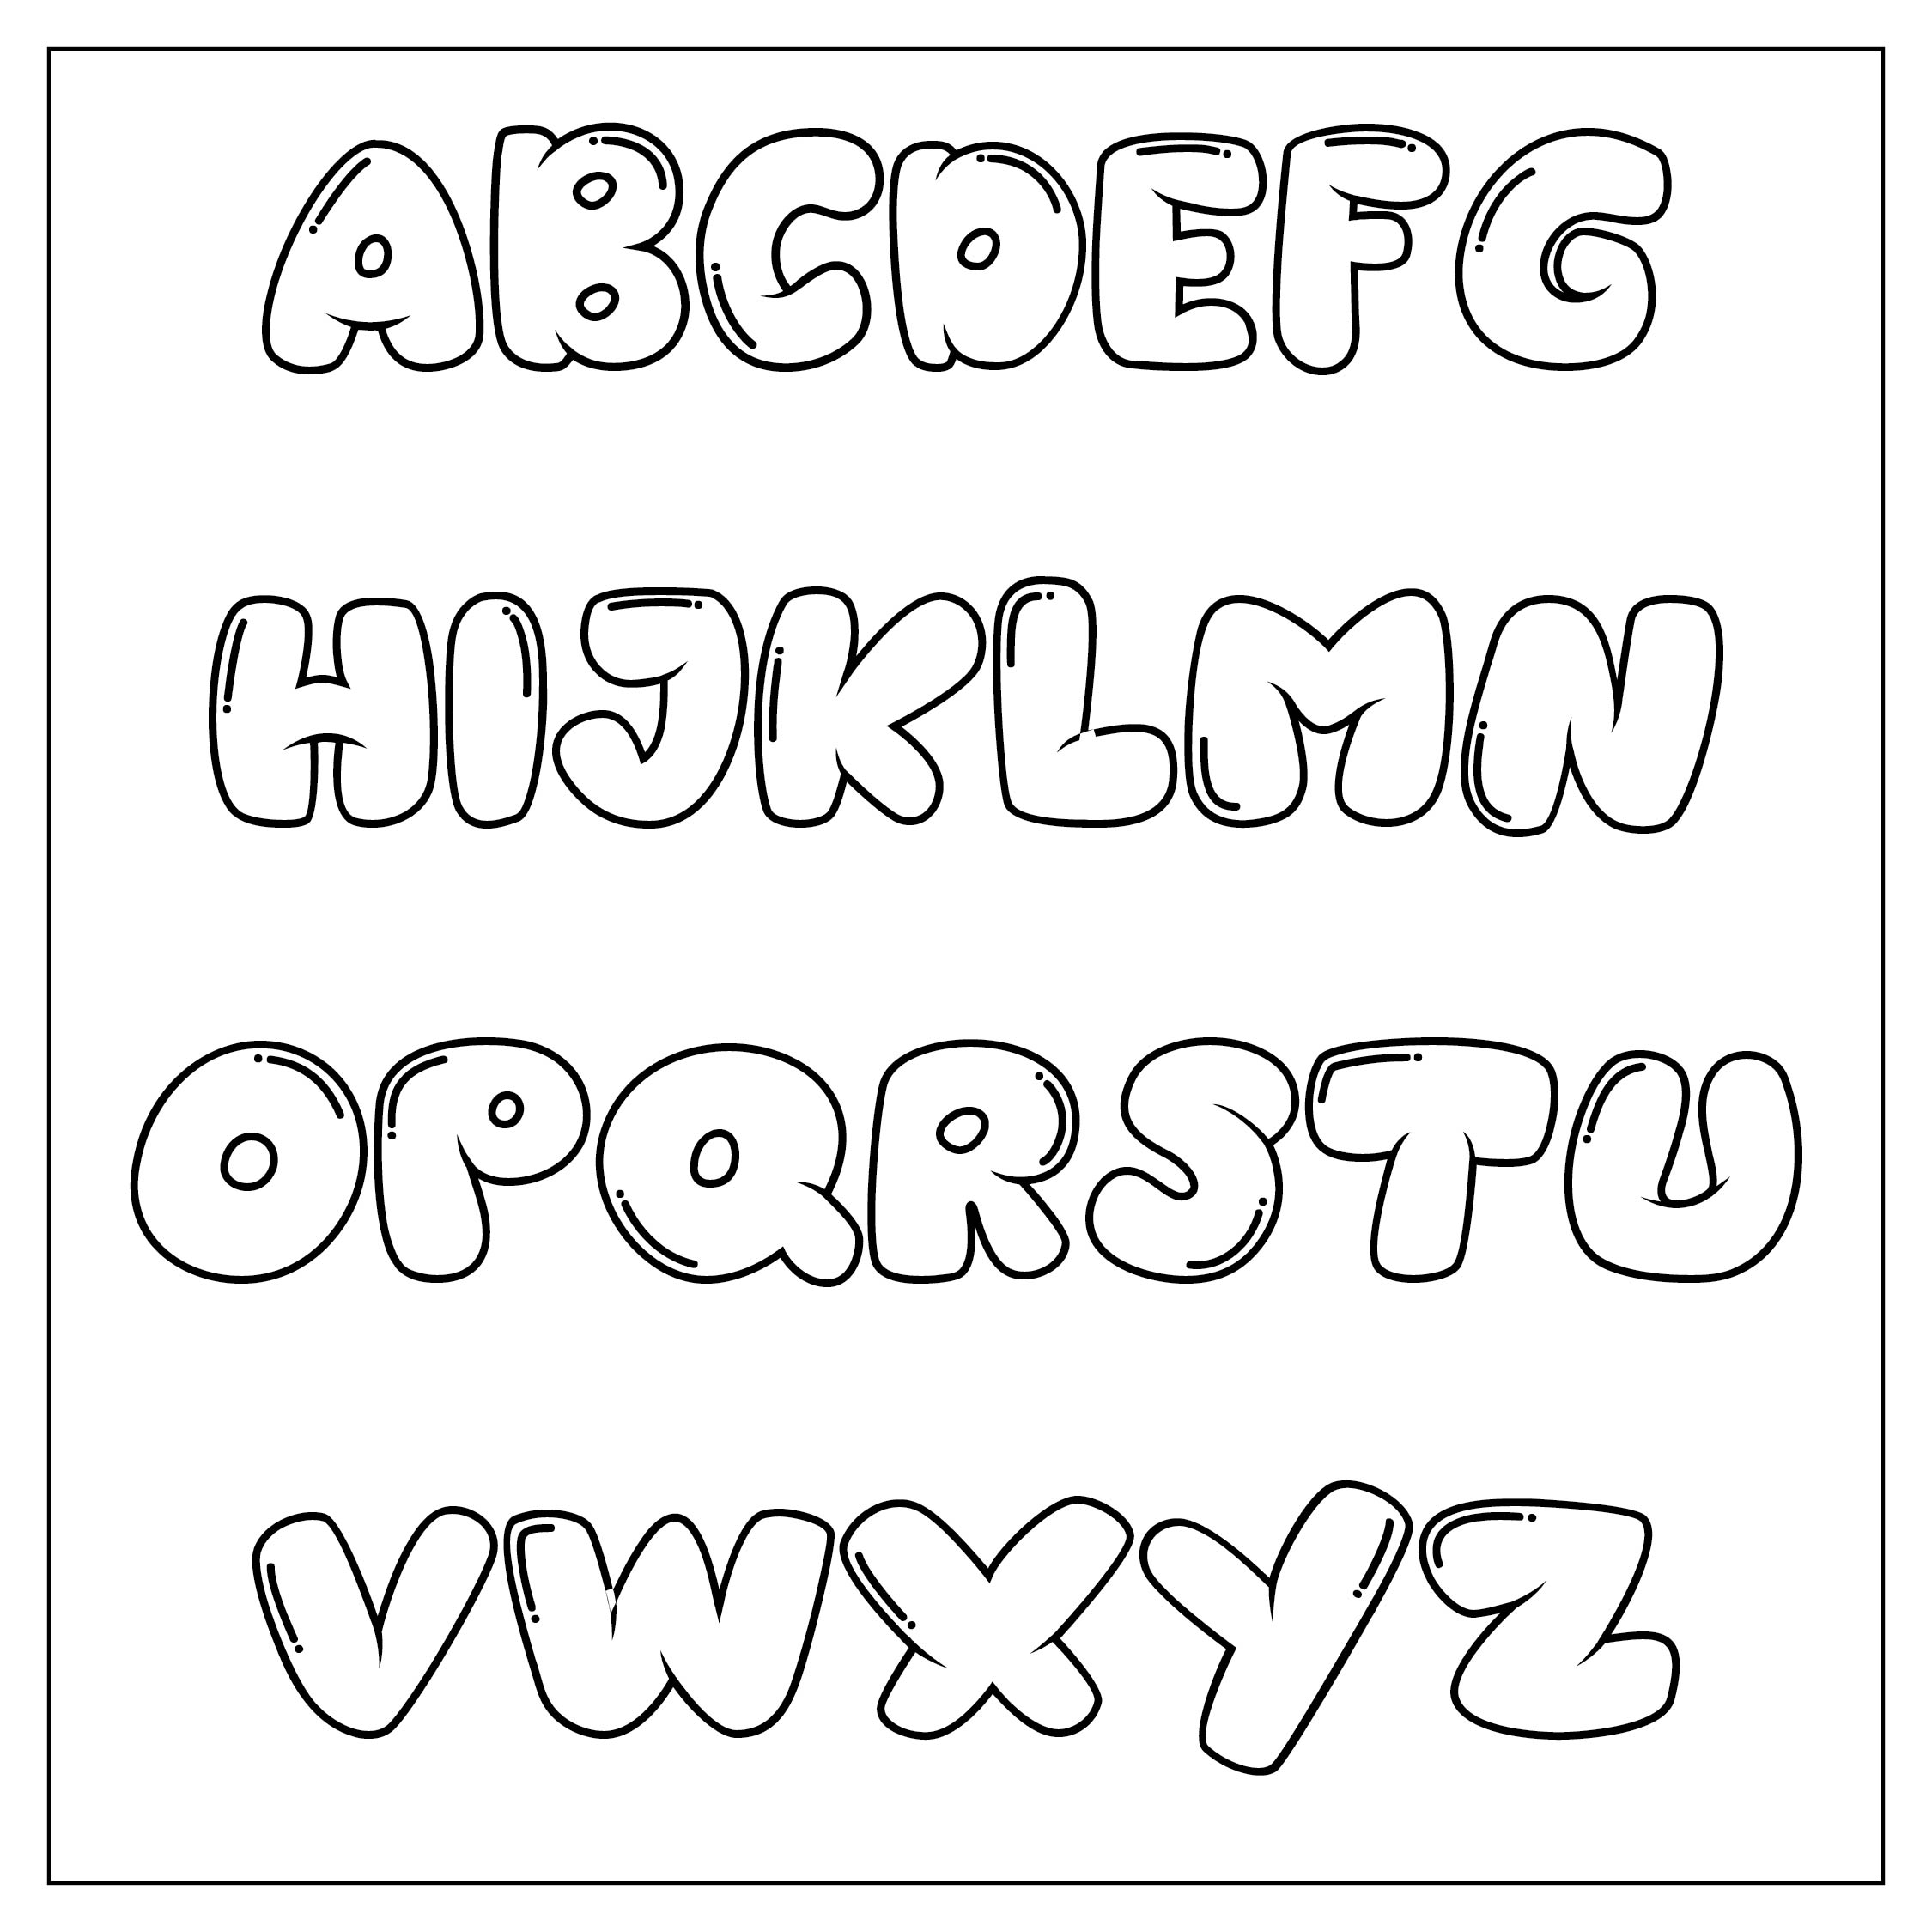 Alphabet Bubble Letters Printable - Customize and Print